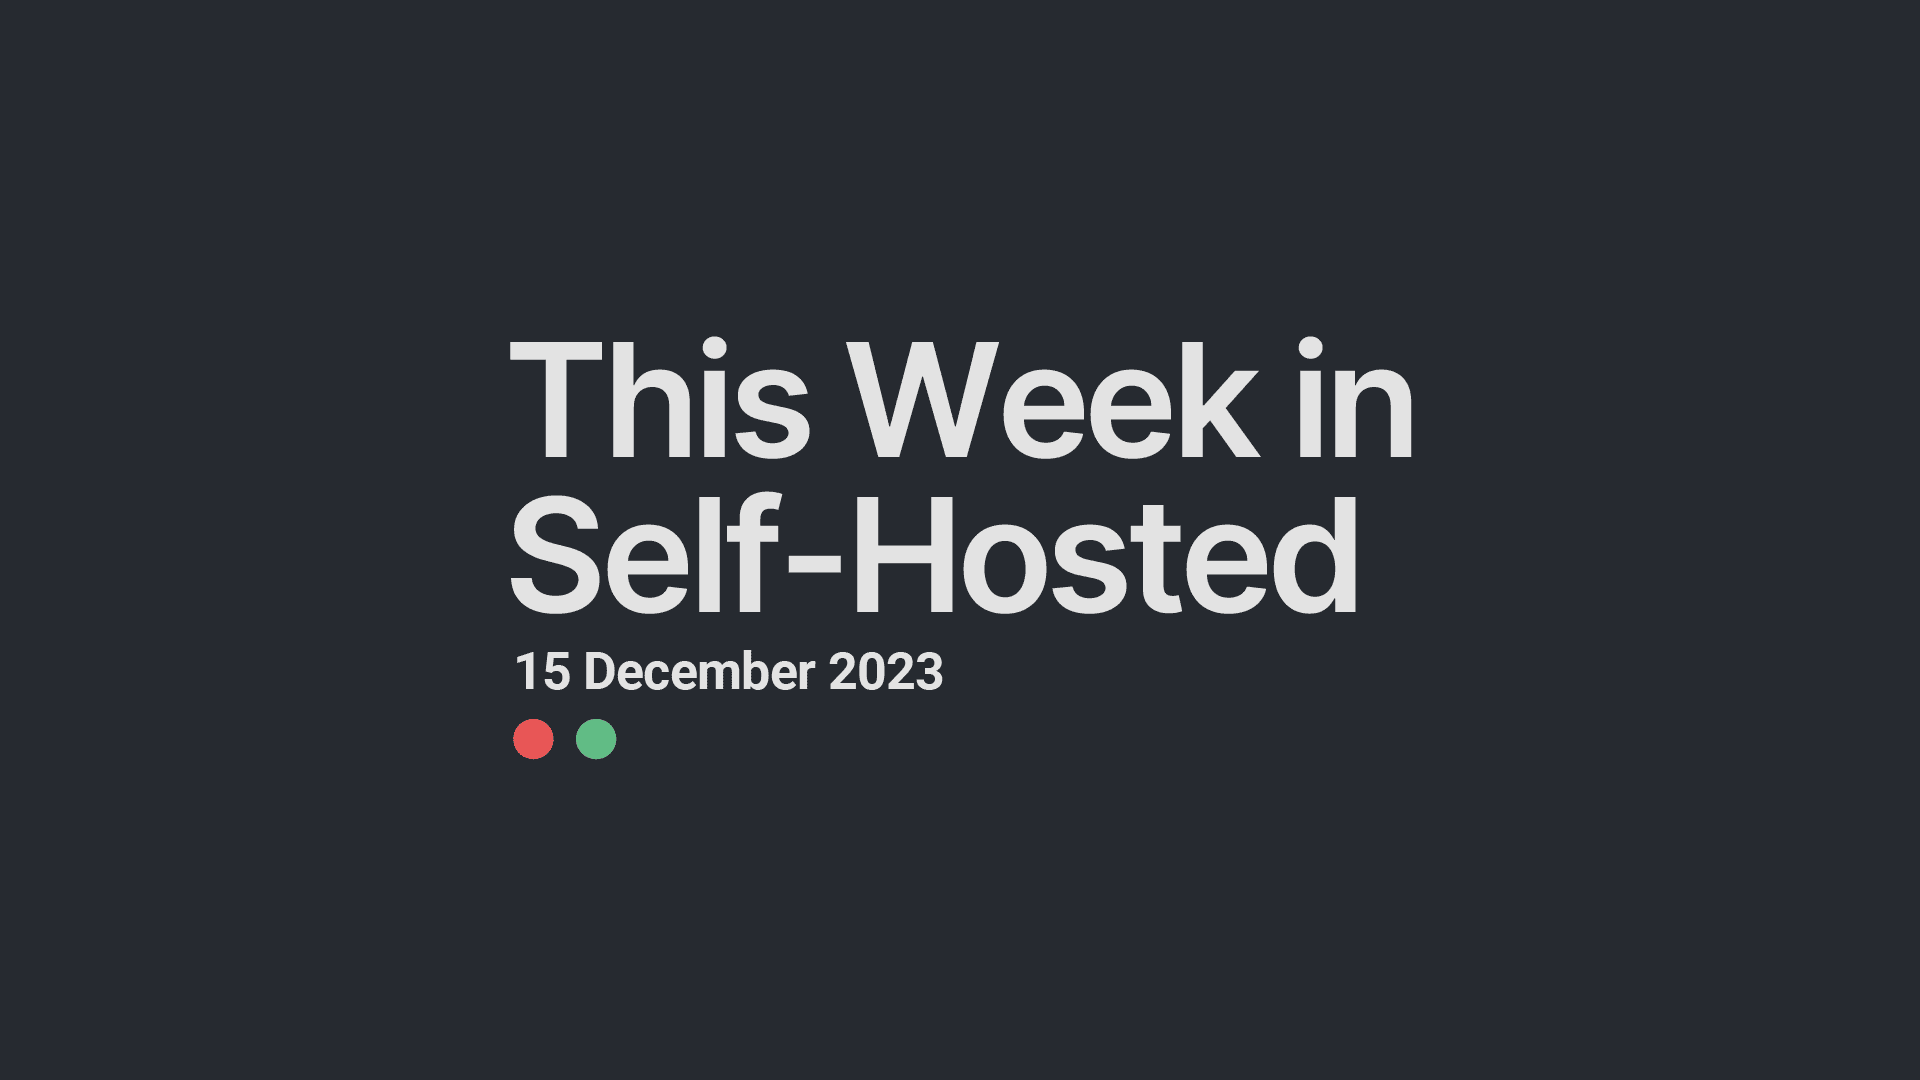 This Week in Self-Hosted (15 December 2023) Post image